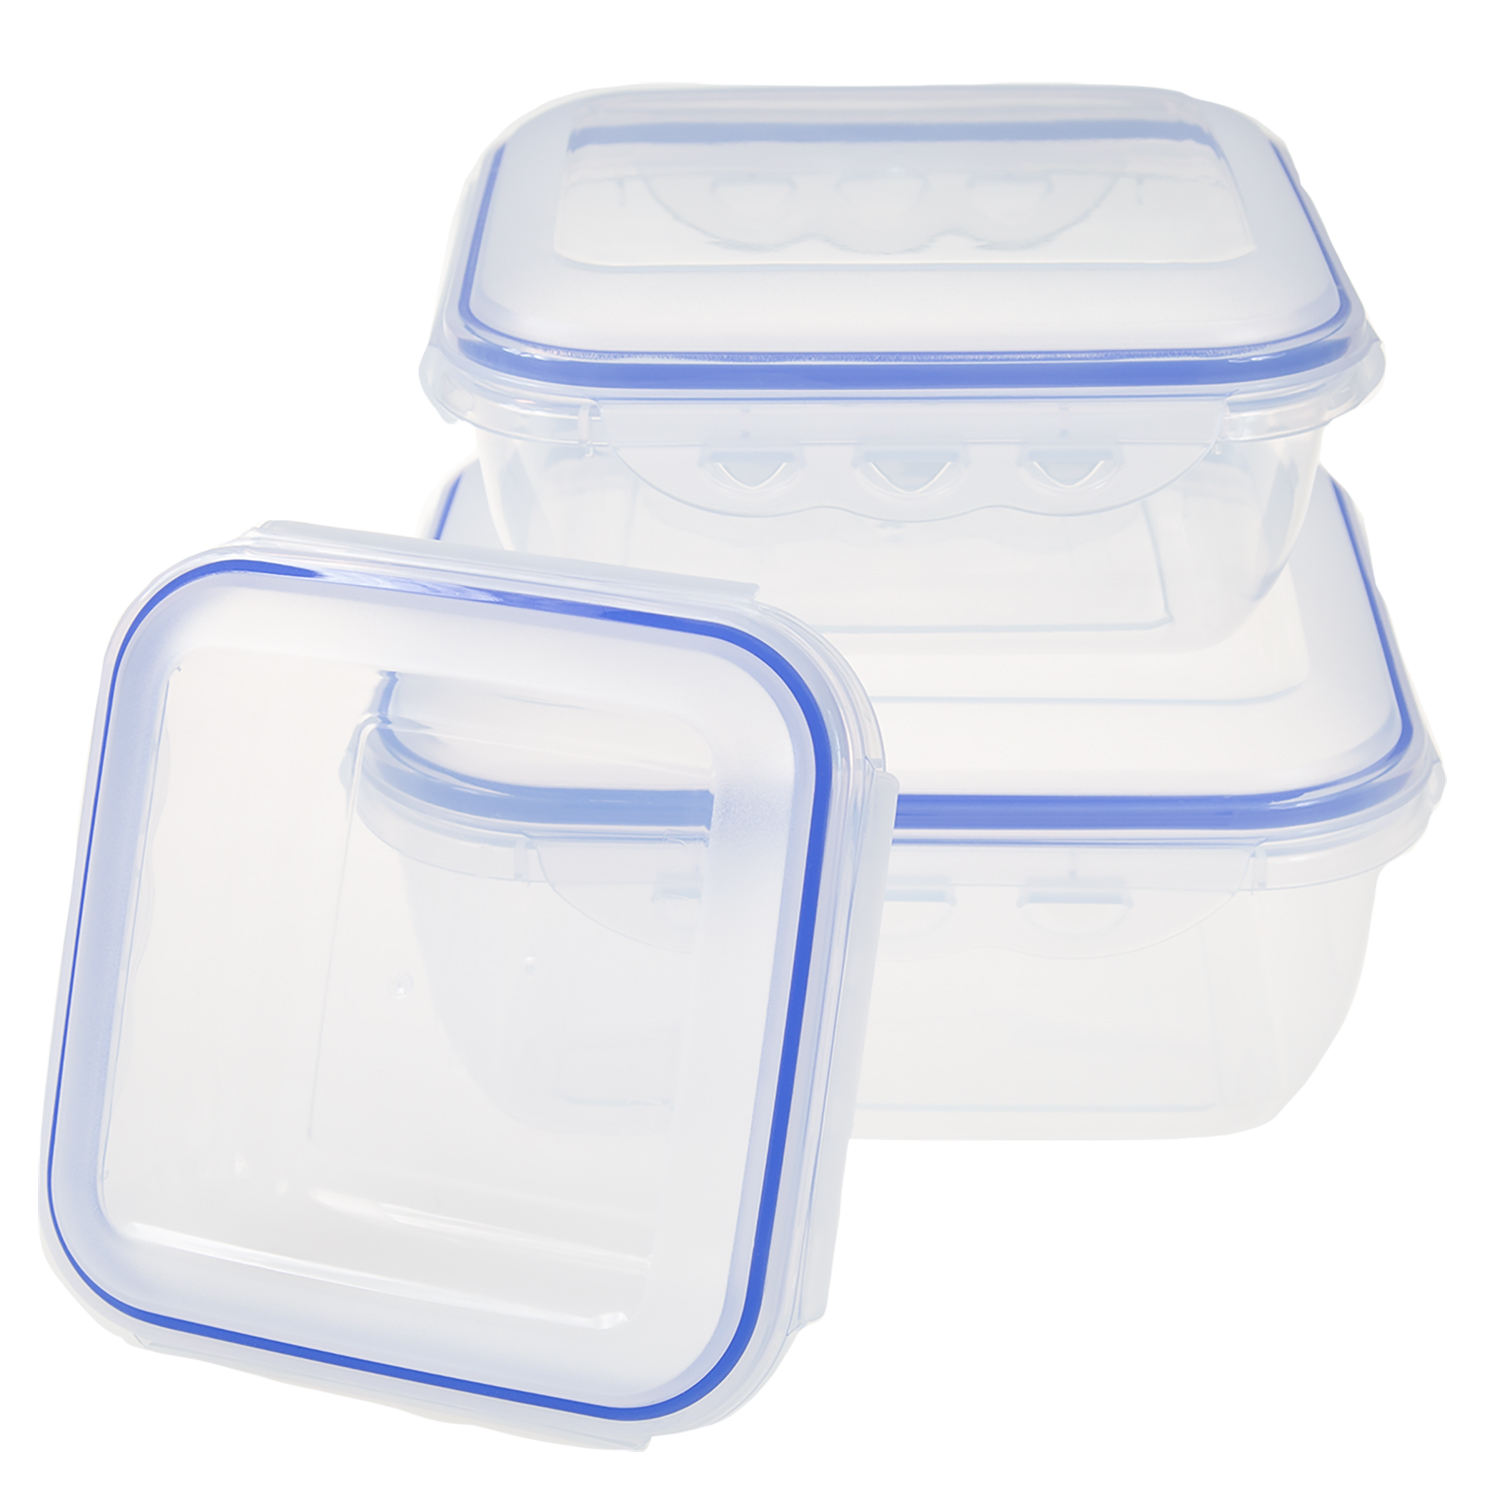 Set of 3 square food containers